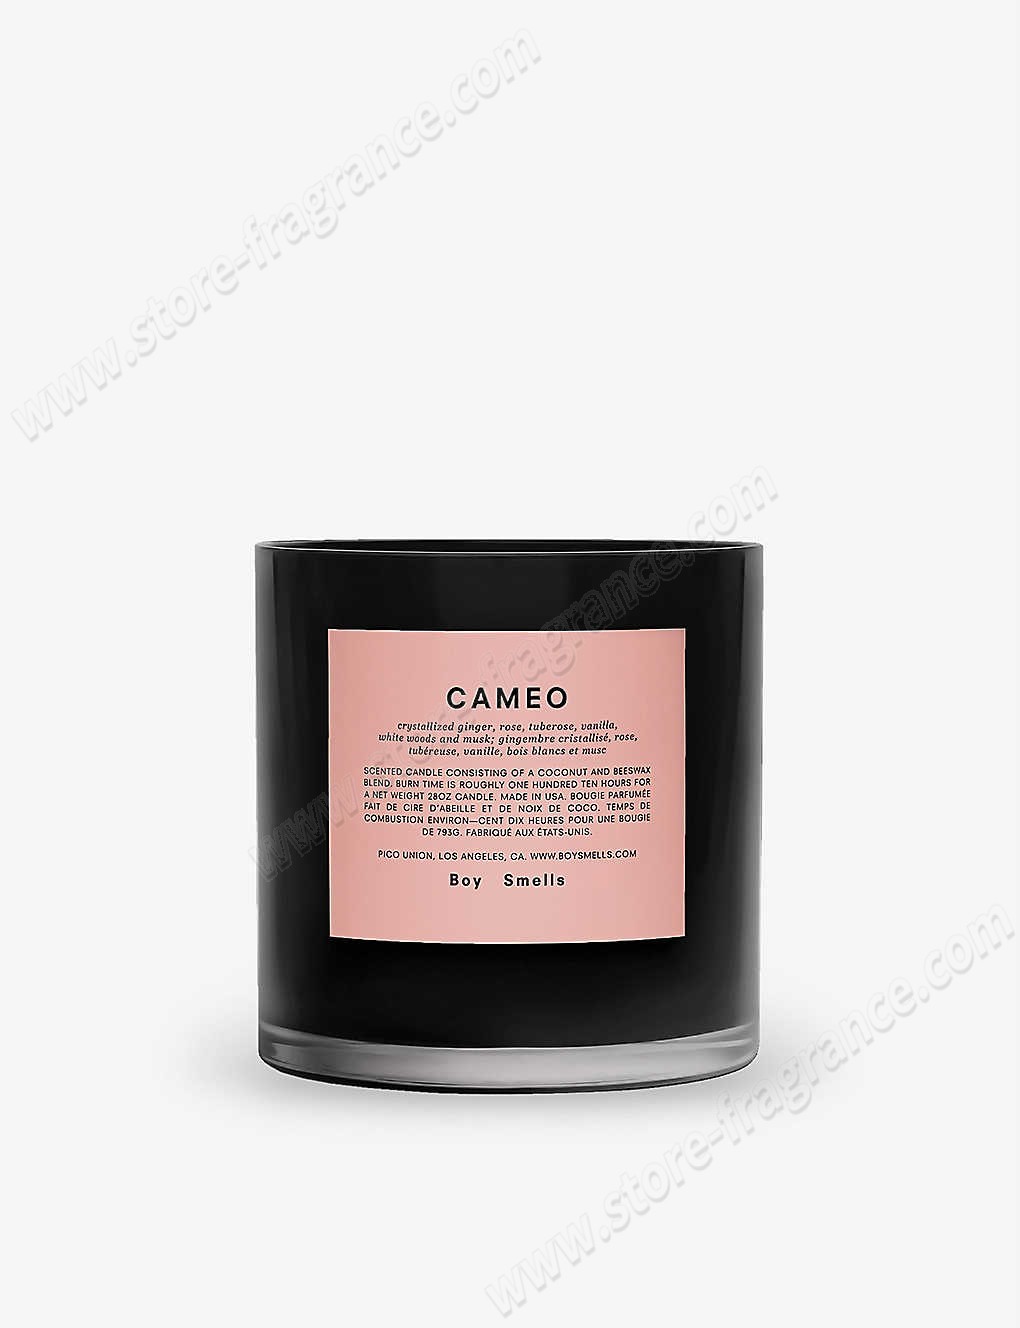 BOY SMELLS/Cameo scented candle 793g ✿ Discount Store - BOY SMELLS/Cameo scented candle 793g ✿ Discount Store